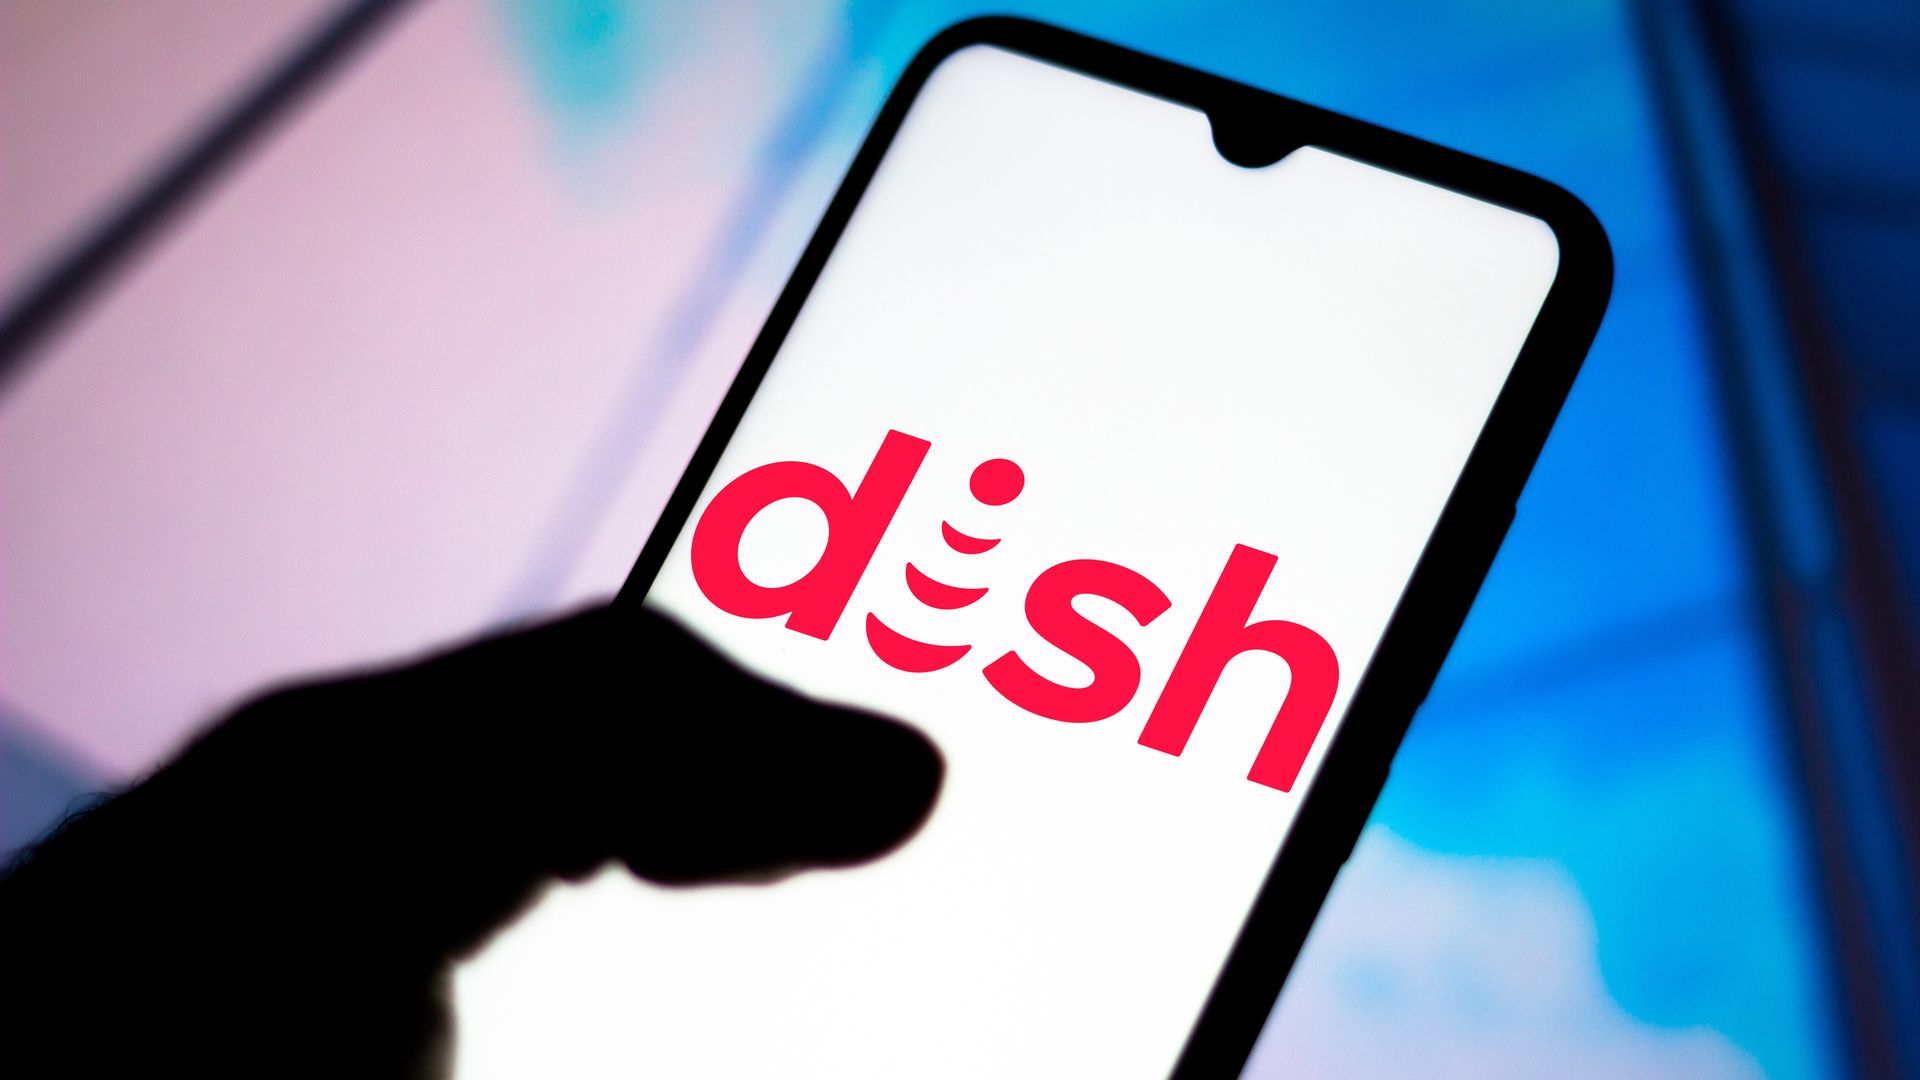 A photo illustration of the Dish Network logo on a smartphone